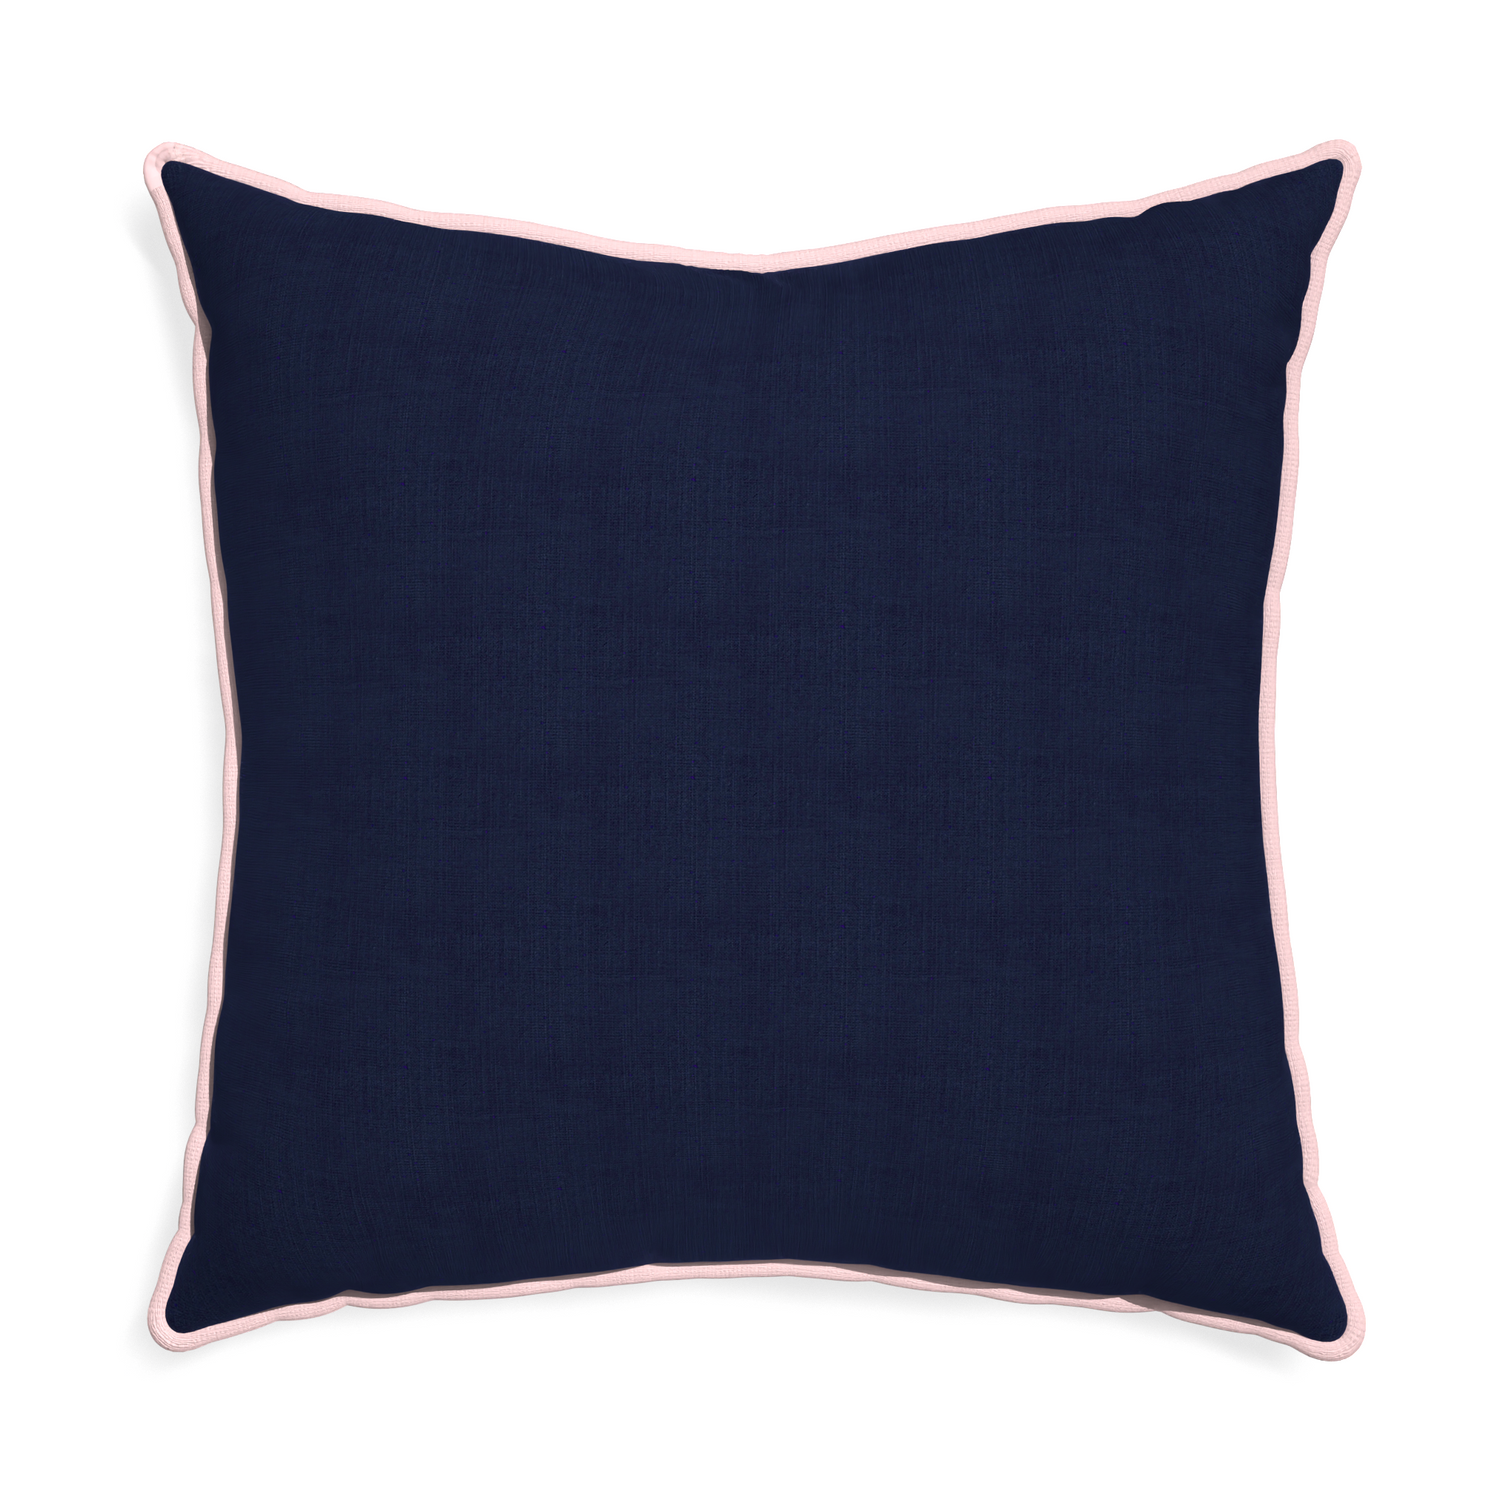 Euro-sham midnight custom navy bluepillow with petal piping on white background